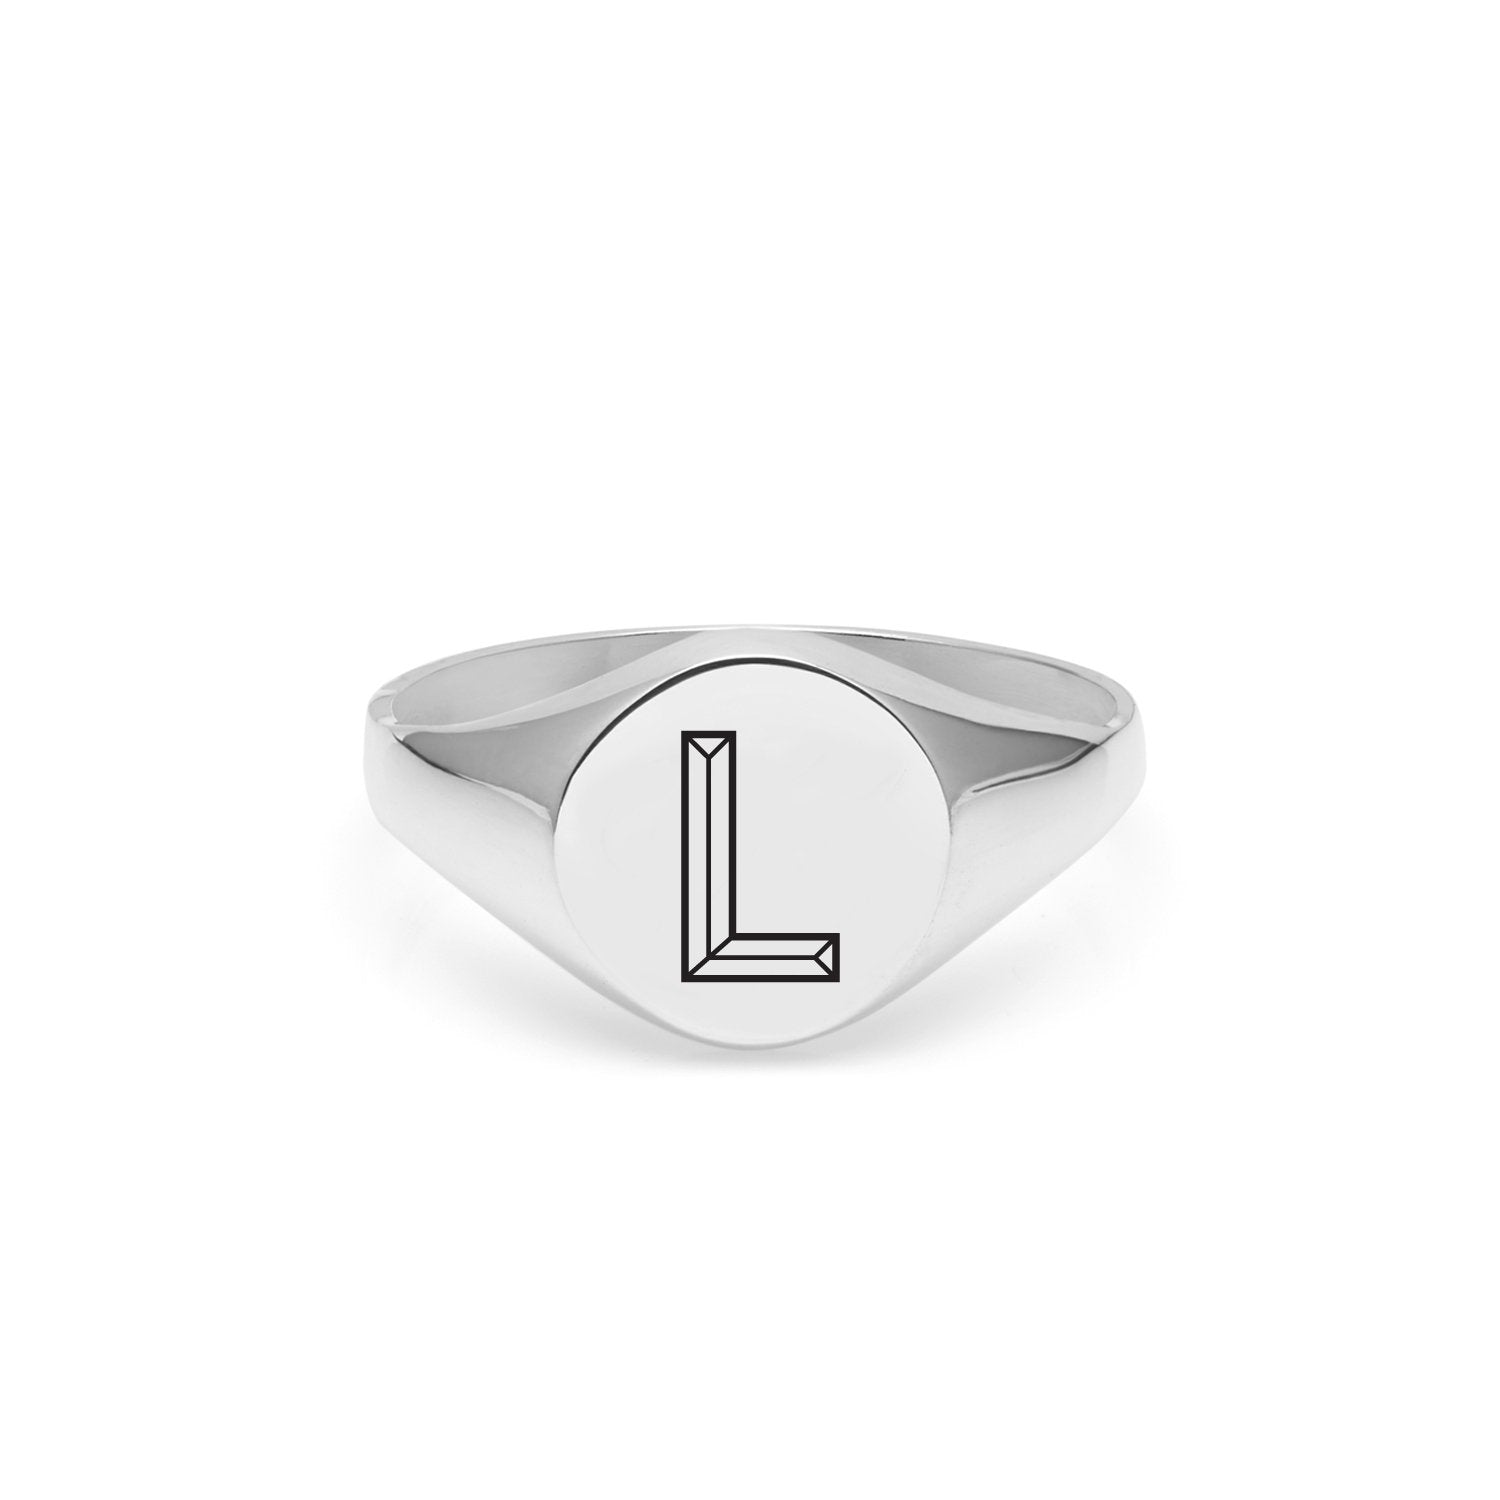 Facett Initial L Round Signet Ring - Silver - Myia Bonner Jewellery